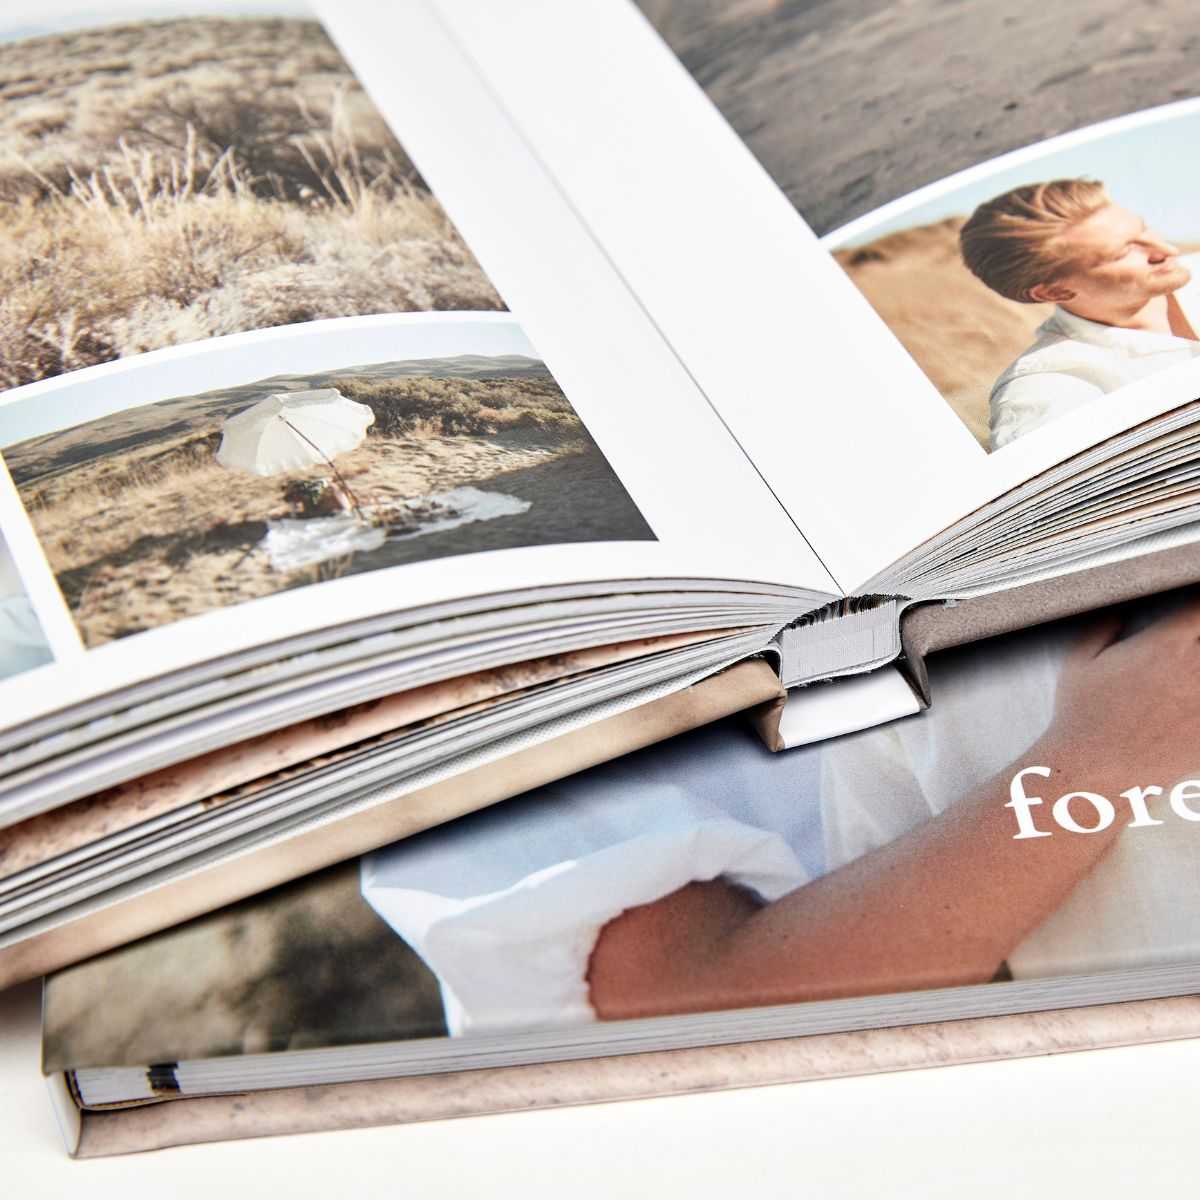 Layflat photo book showing spread